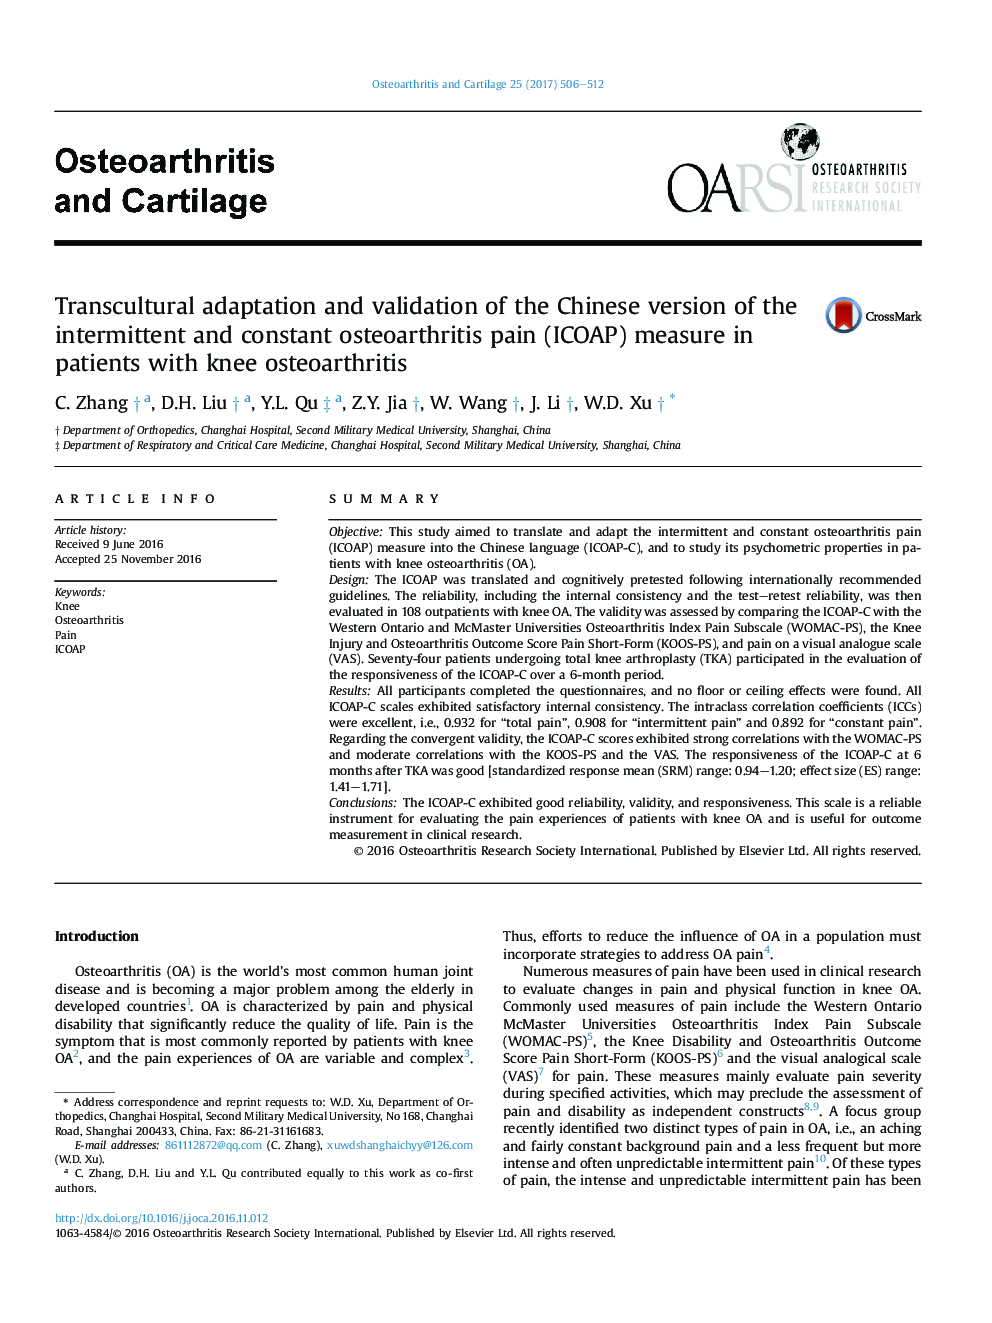 Transcultural adaptation and validation of the Chinese version of the intermittent and constant osteoarthritis pain (ICOAP) measure in patients with knee osteoarthritis